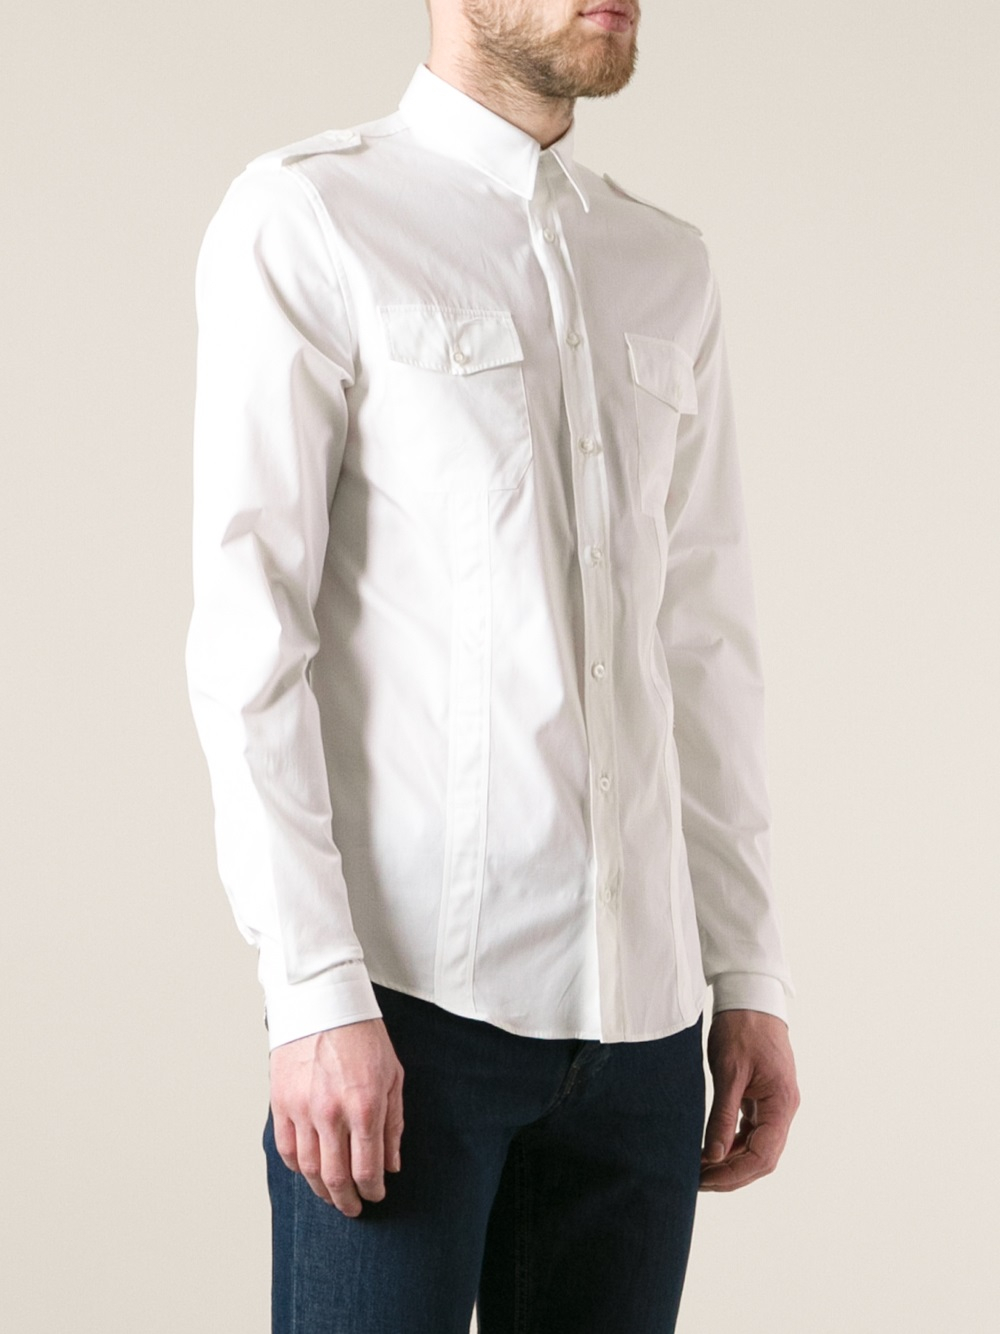 Lyst - Gucci Button Down Shirt in White for Men